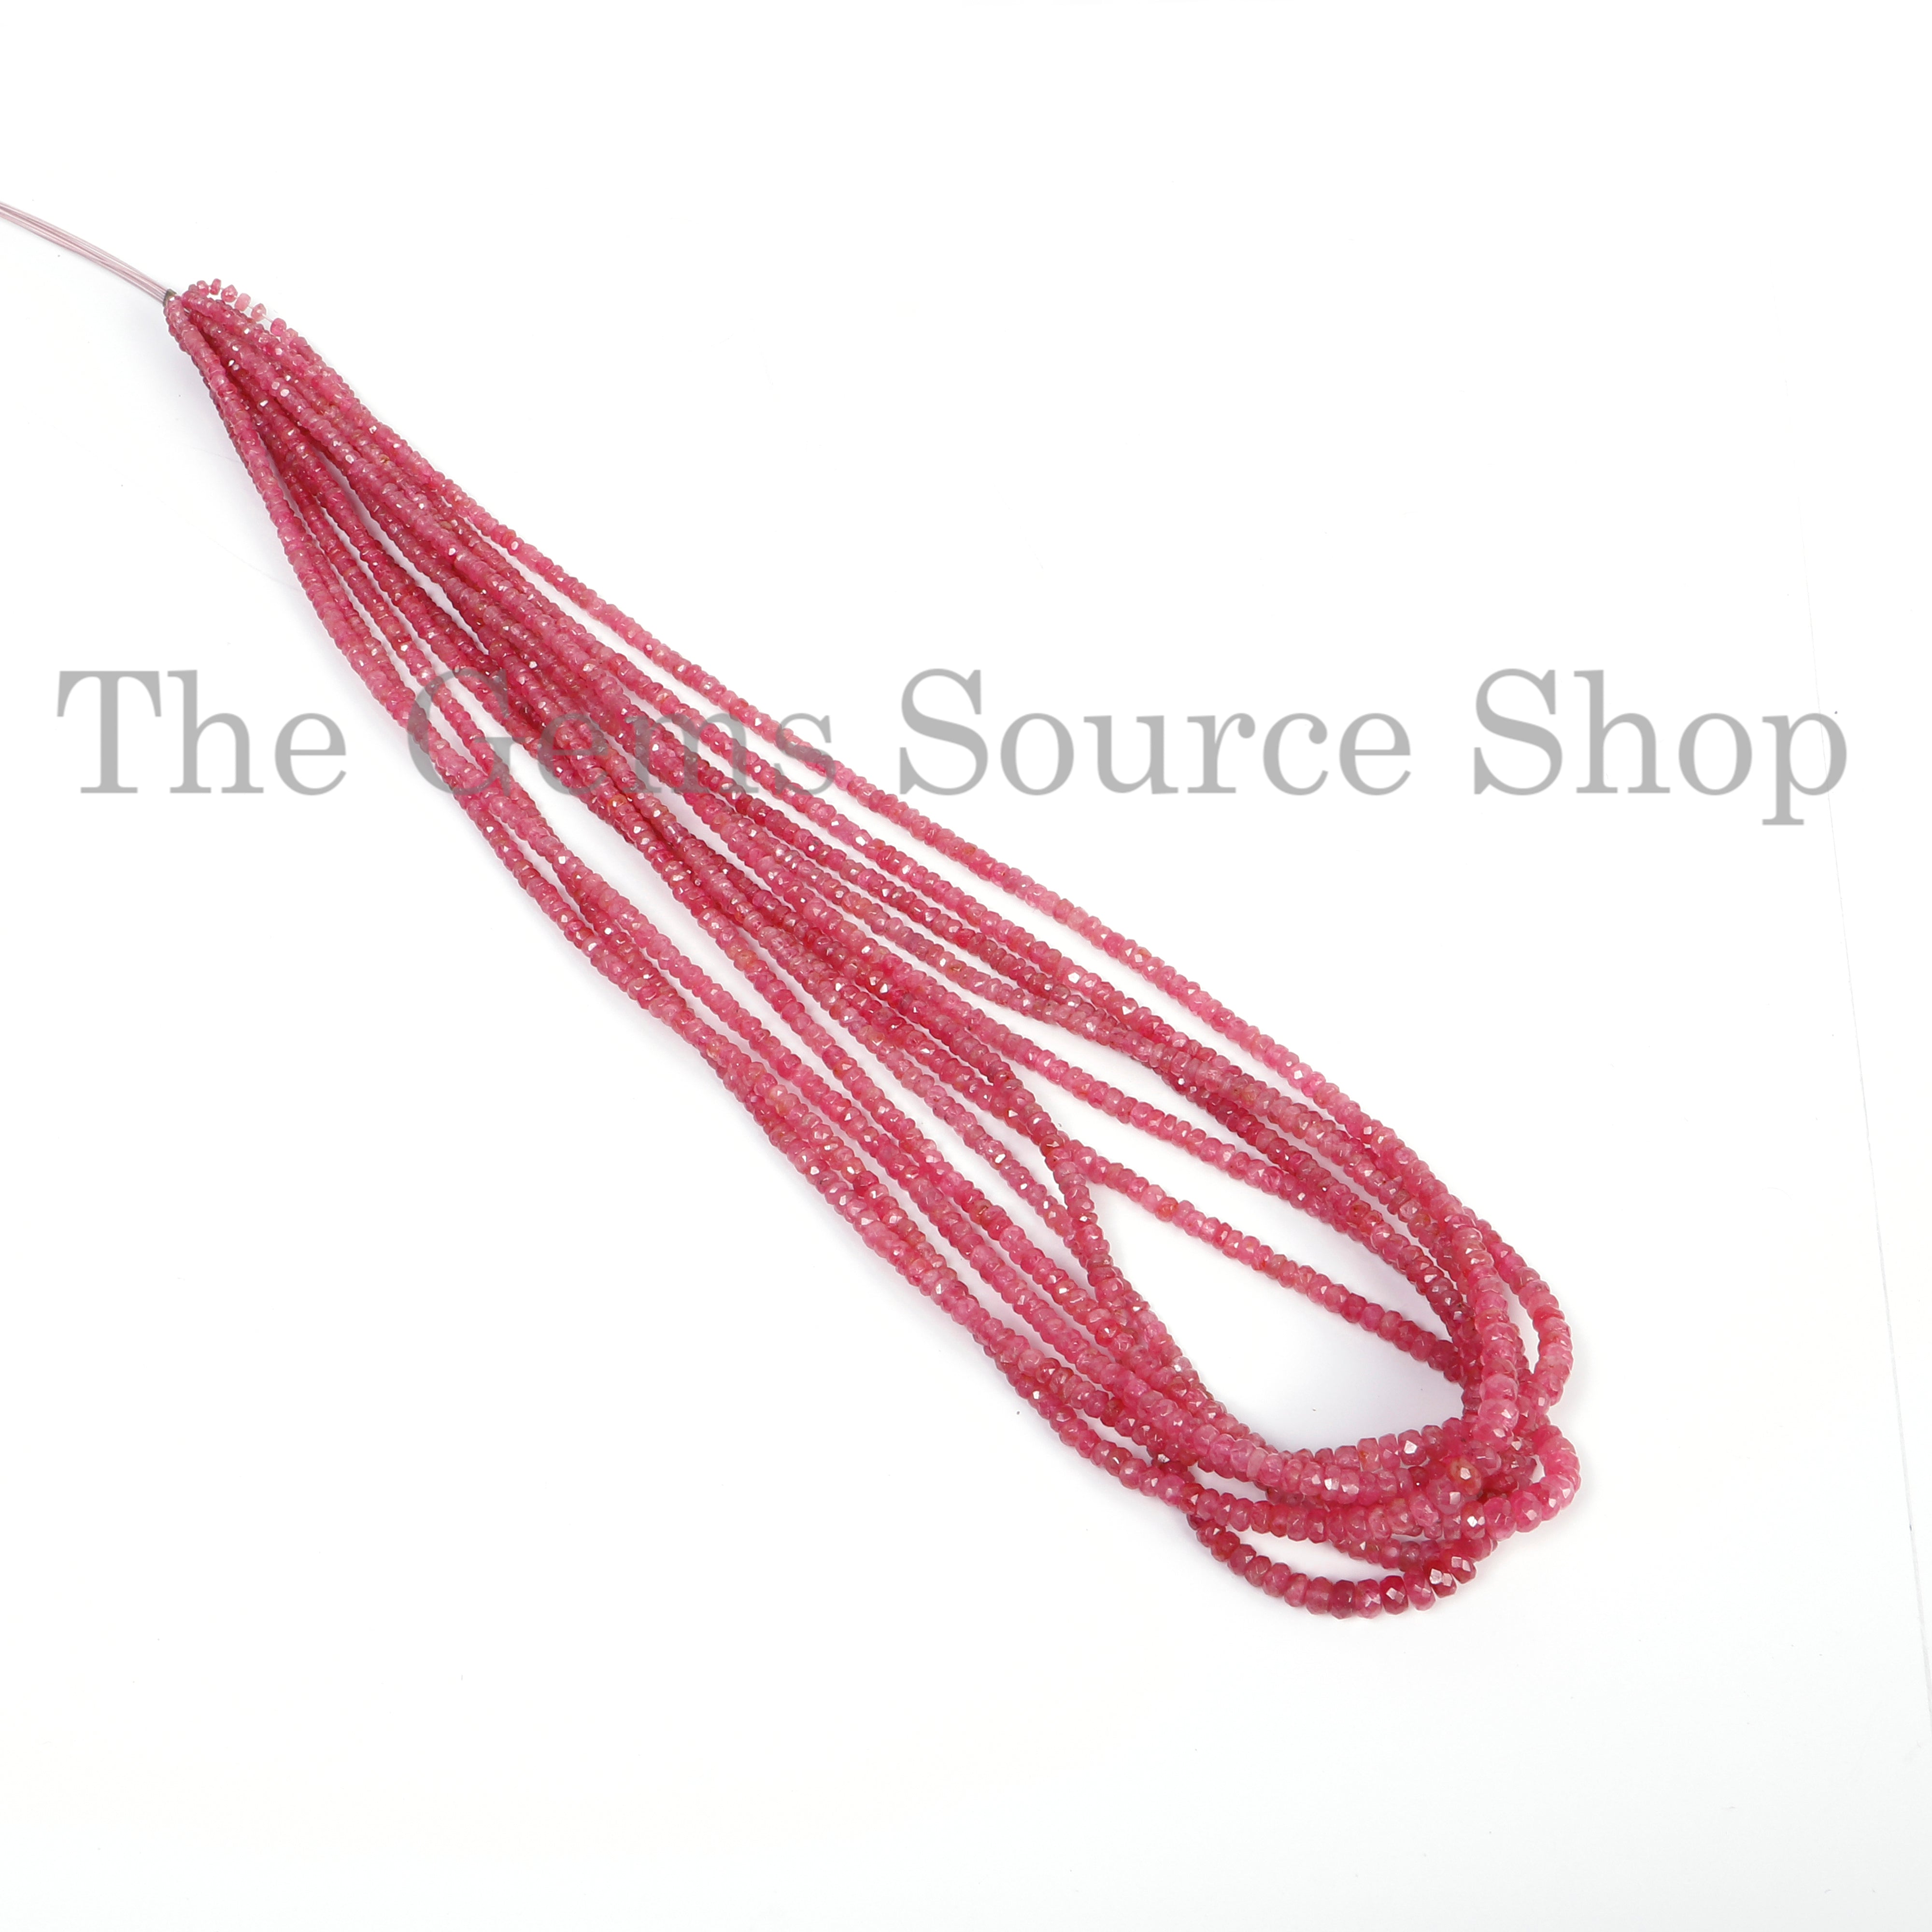 Red Spinel Beads, Spinel Rondelle Beads, Spinel Faceted Beads, Spinel Gemstone Beads